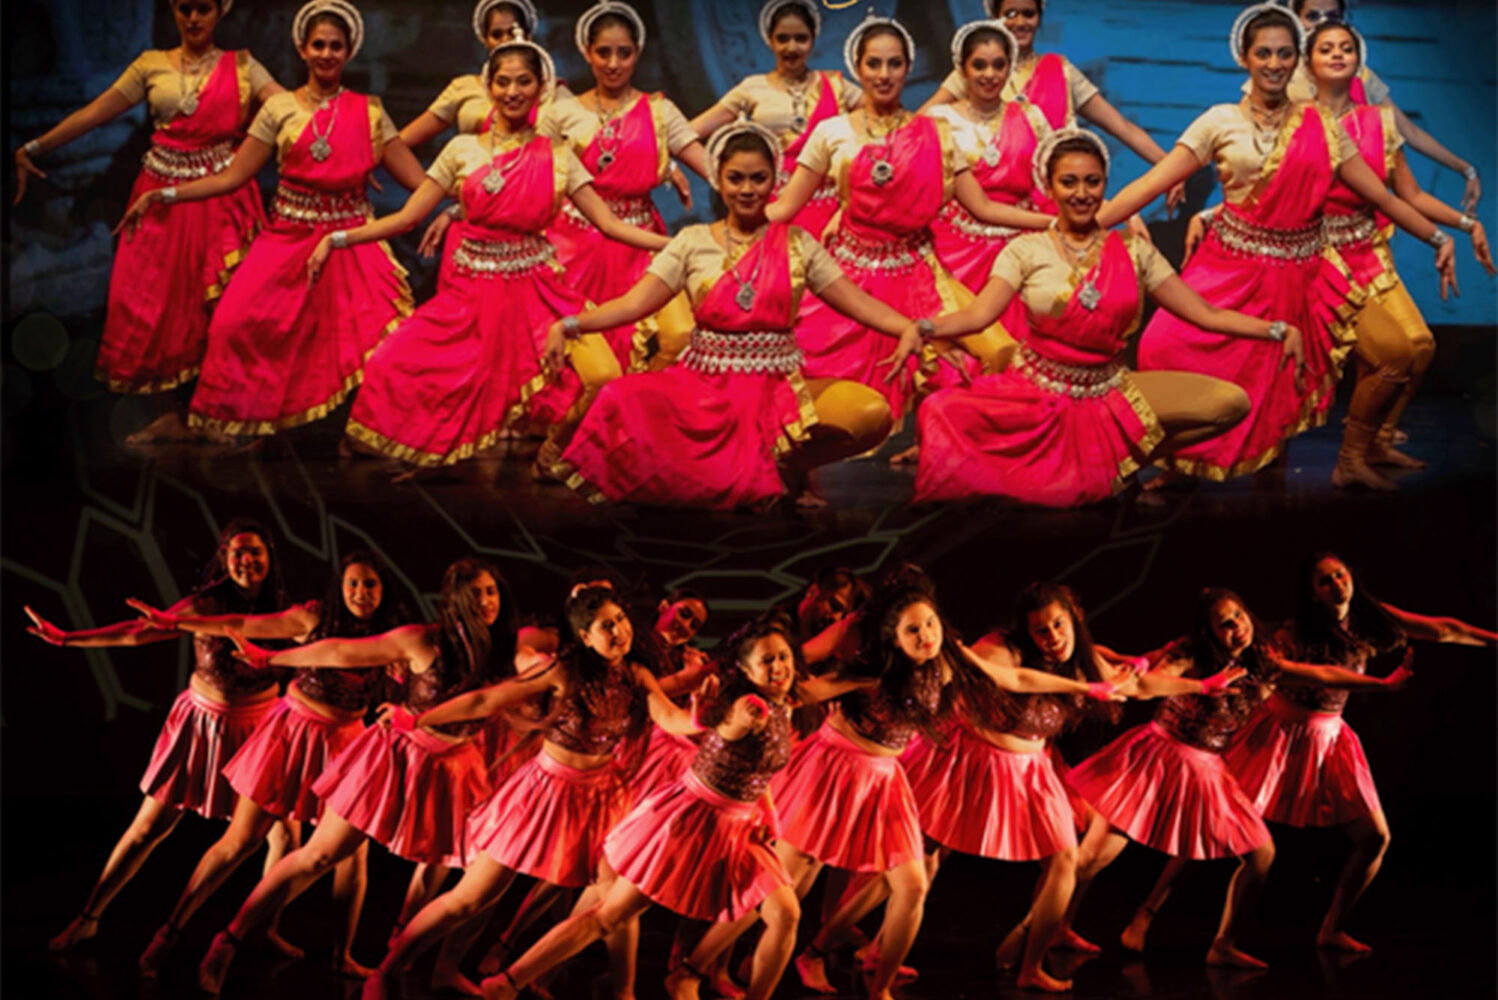 Photo: A row of bollywood dancers in bright red outfits dancing at a recent show